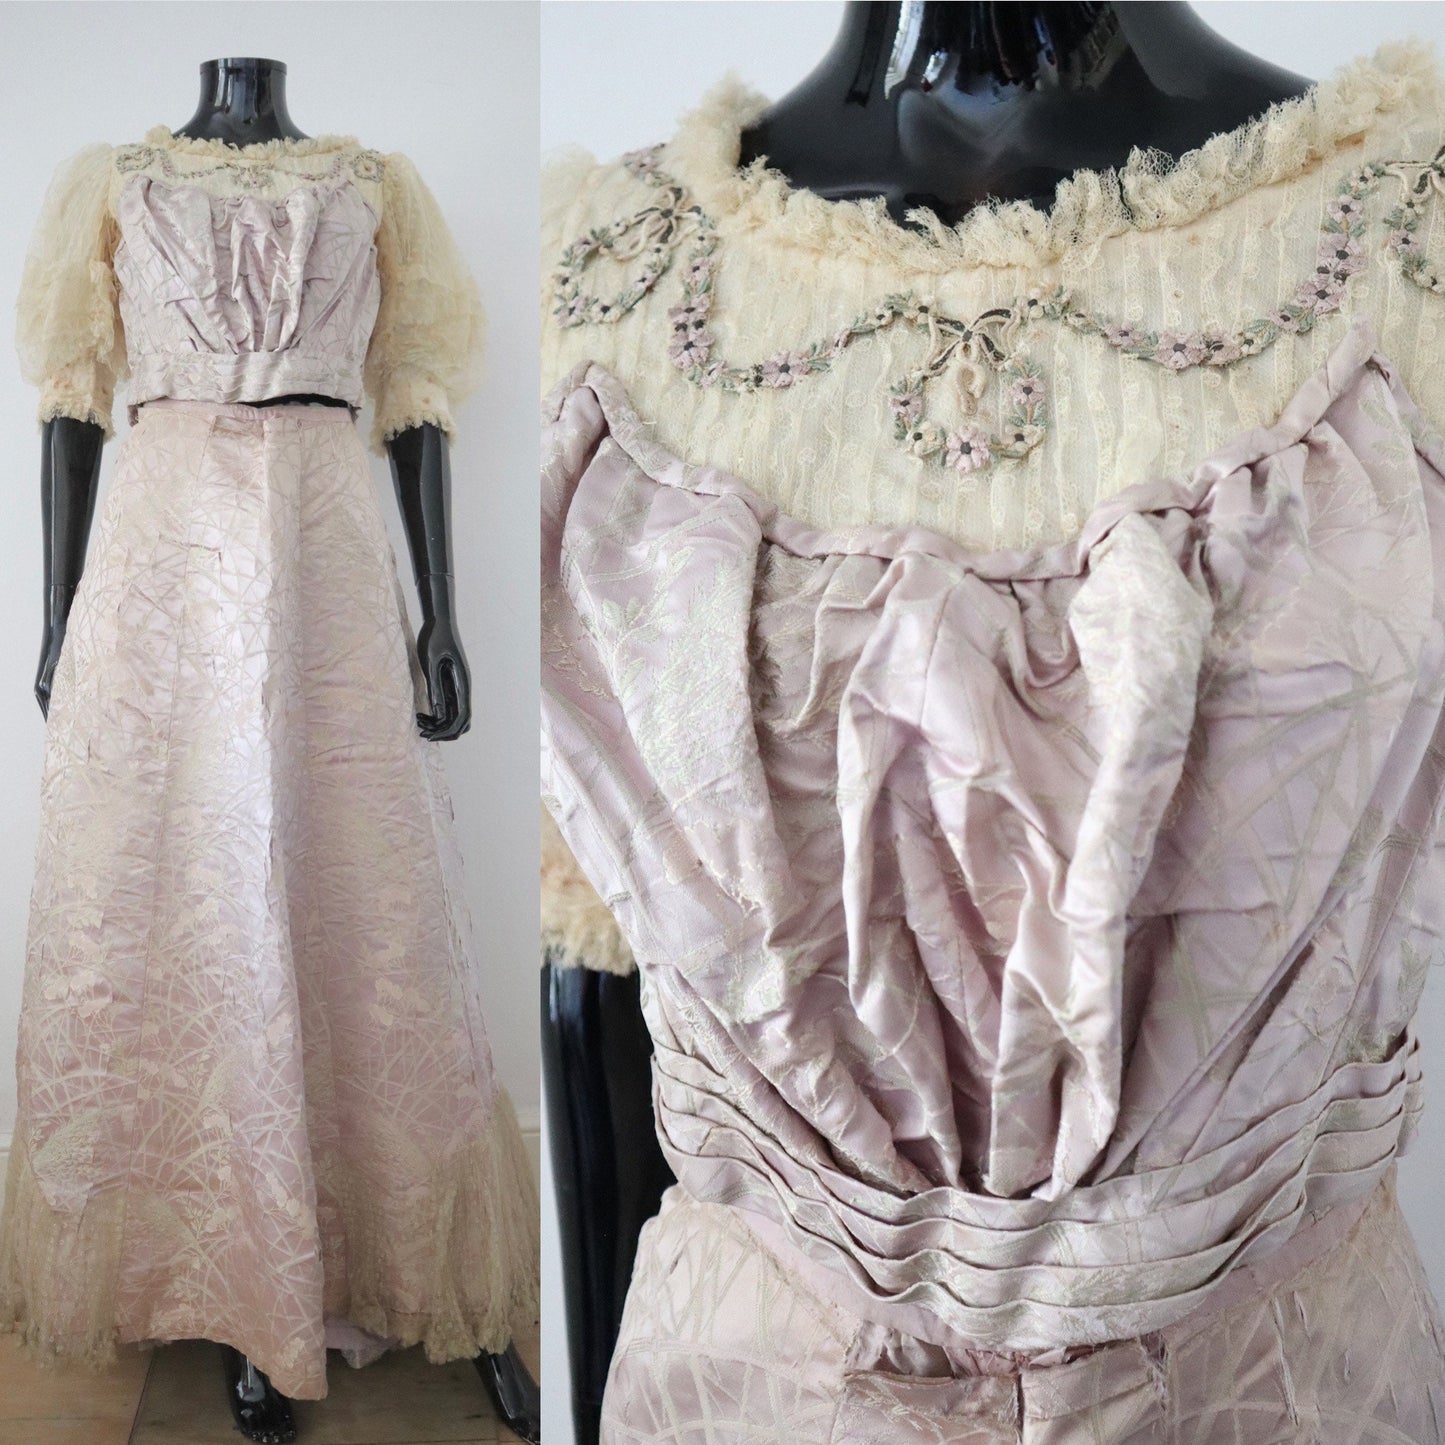 Antique French Lilac Silk Brocade Bodice Skirt Costume Boned Floral 1900 Lace